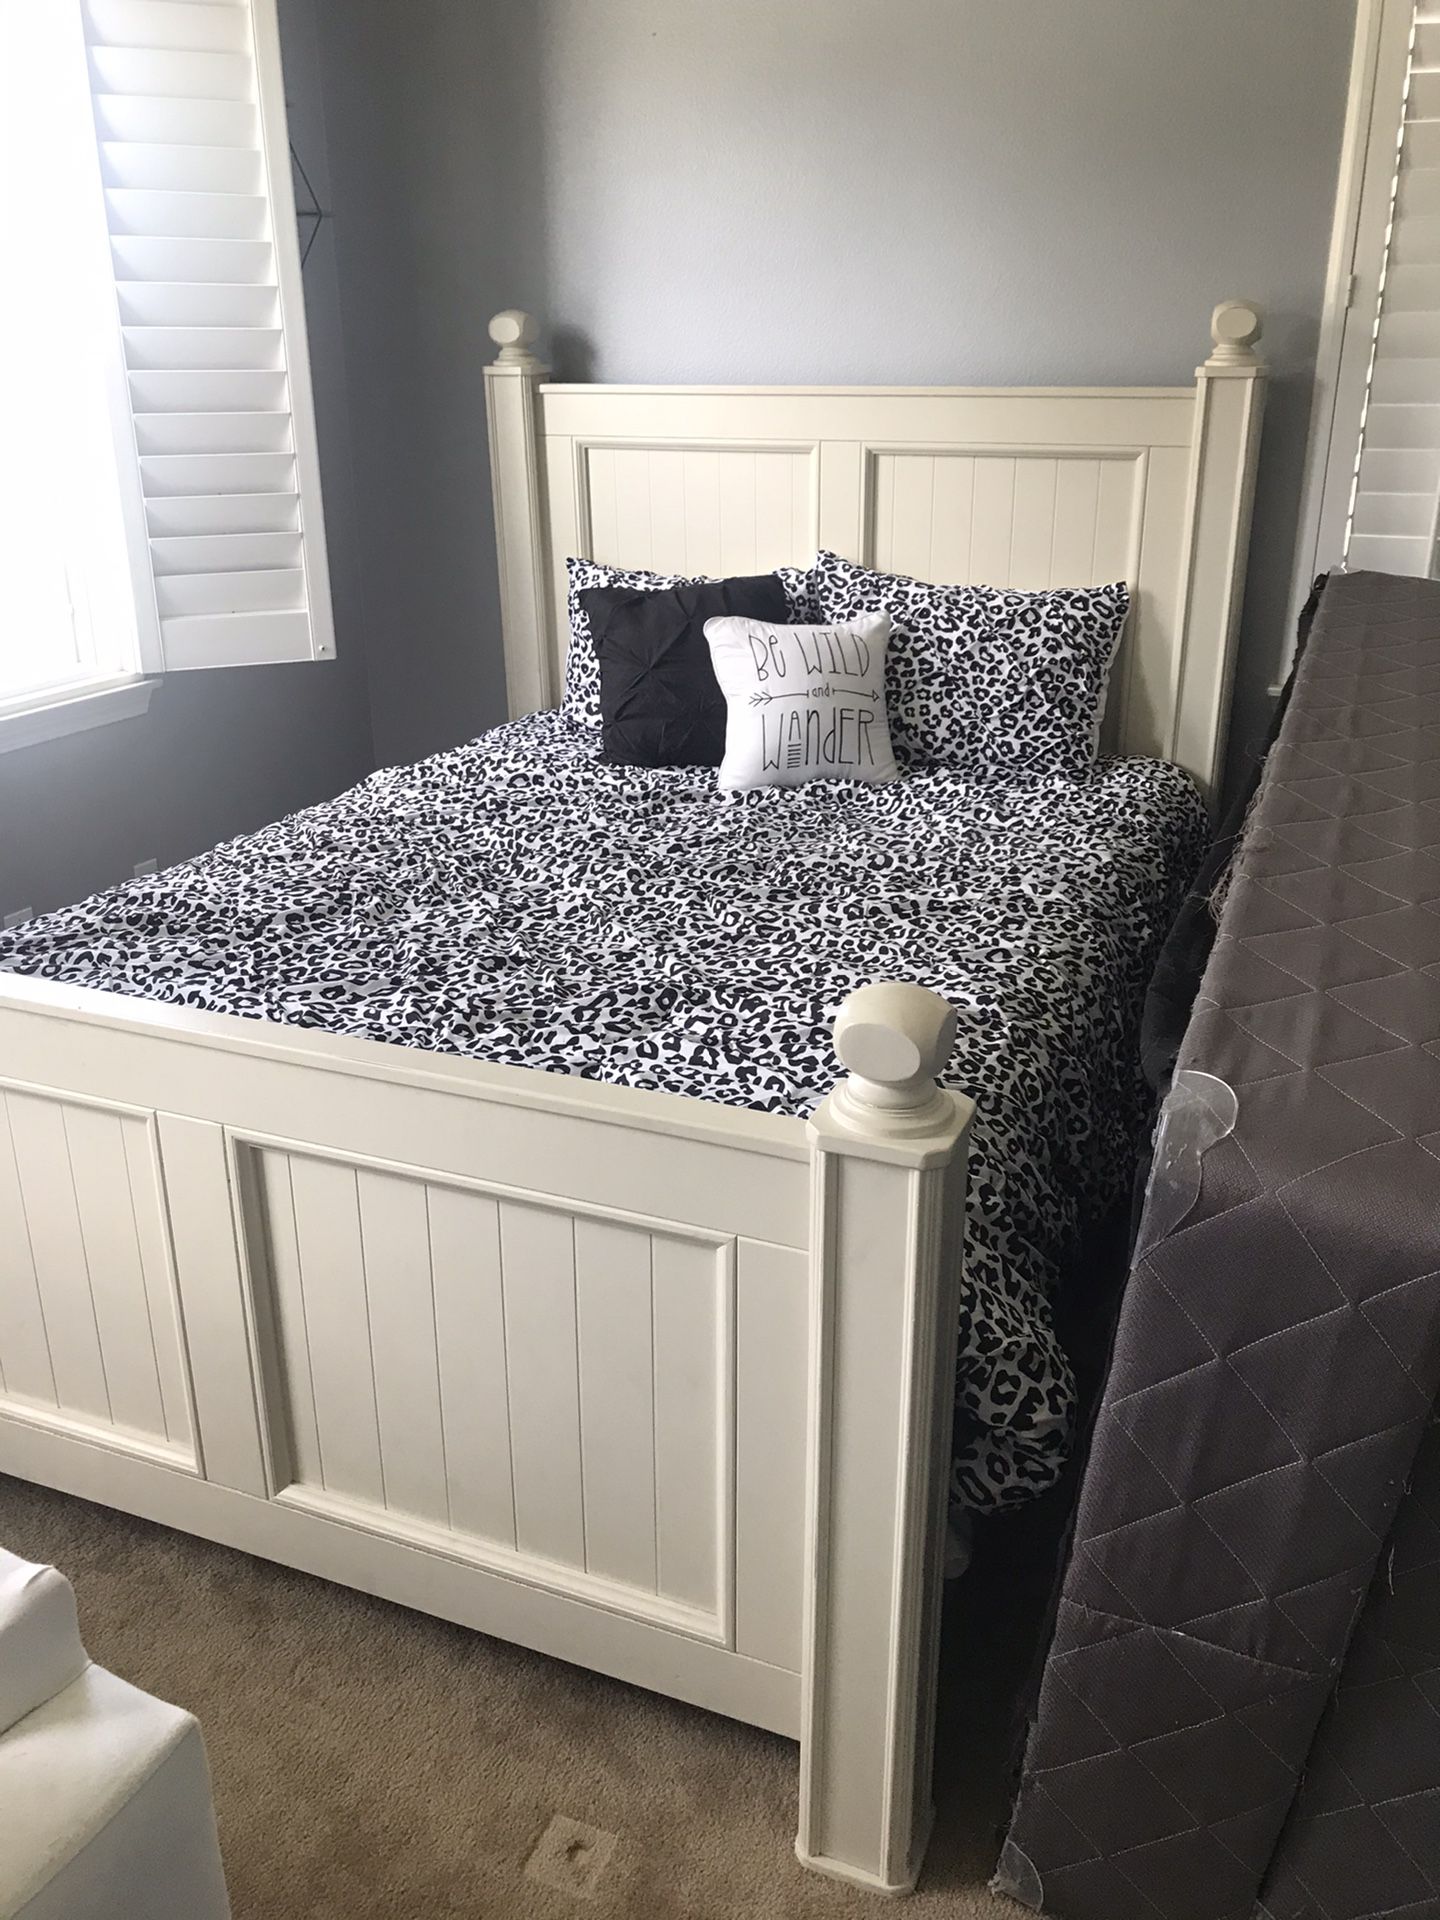 Queen bed frame with mattress, box spring and brand new pillows/ comforter set included